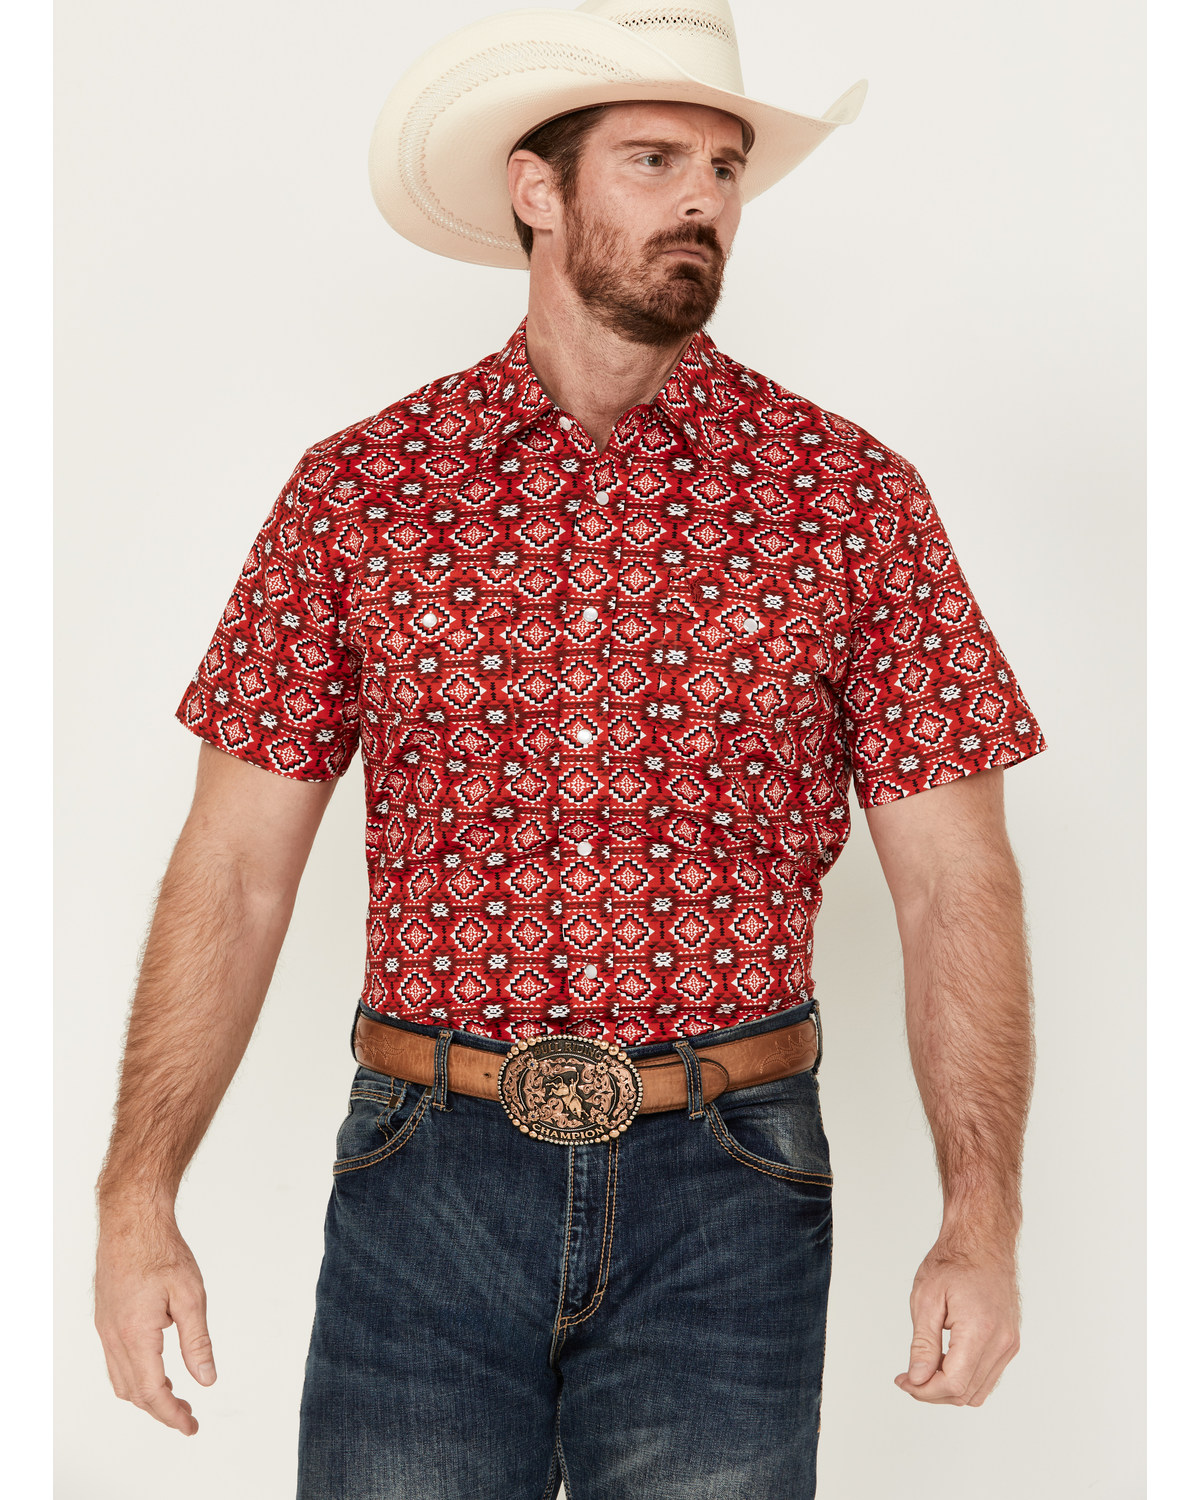 Rodeo Clothing Men's Southwestern Print Short Sleeve Pearl Snap Stretch Western Shirt